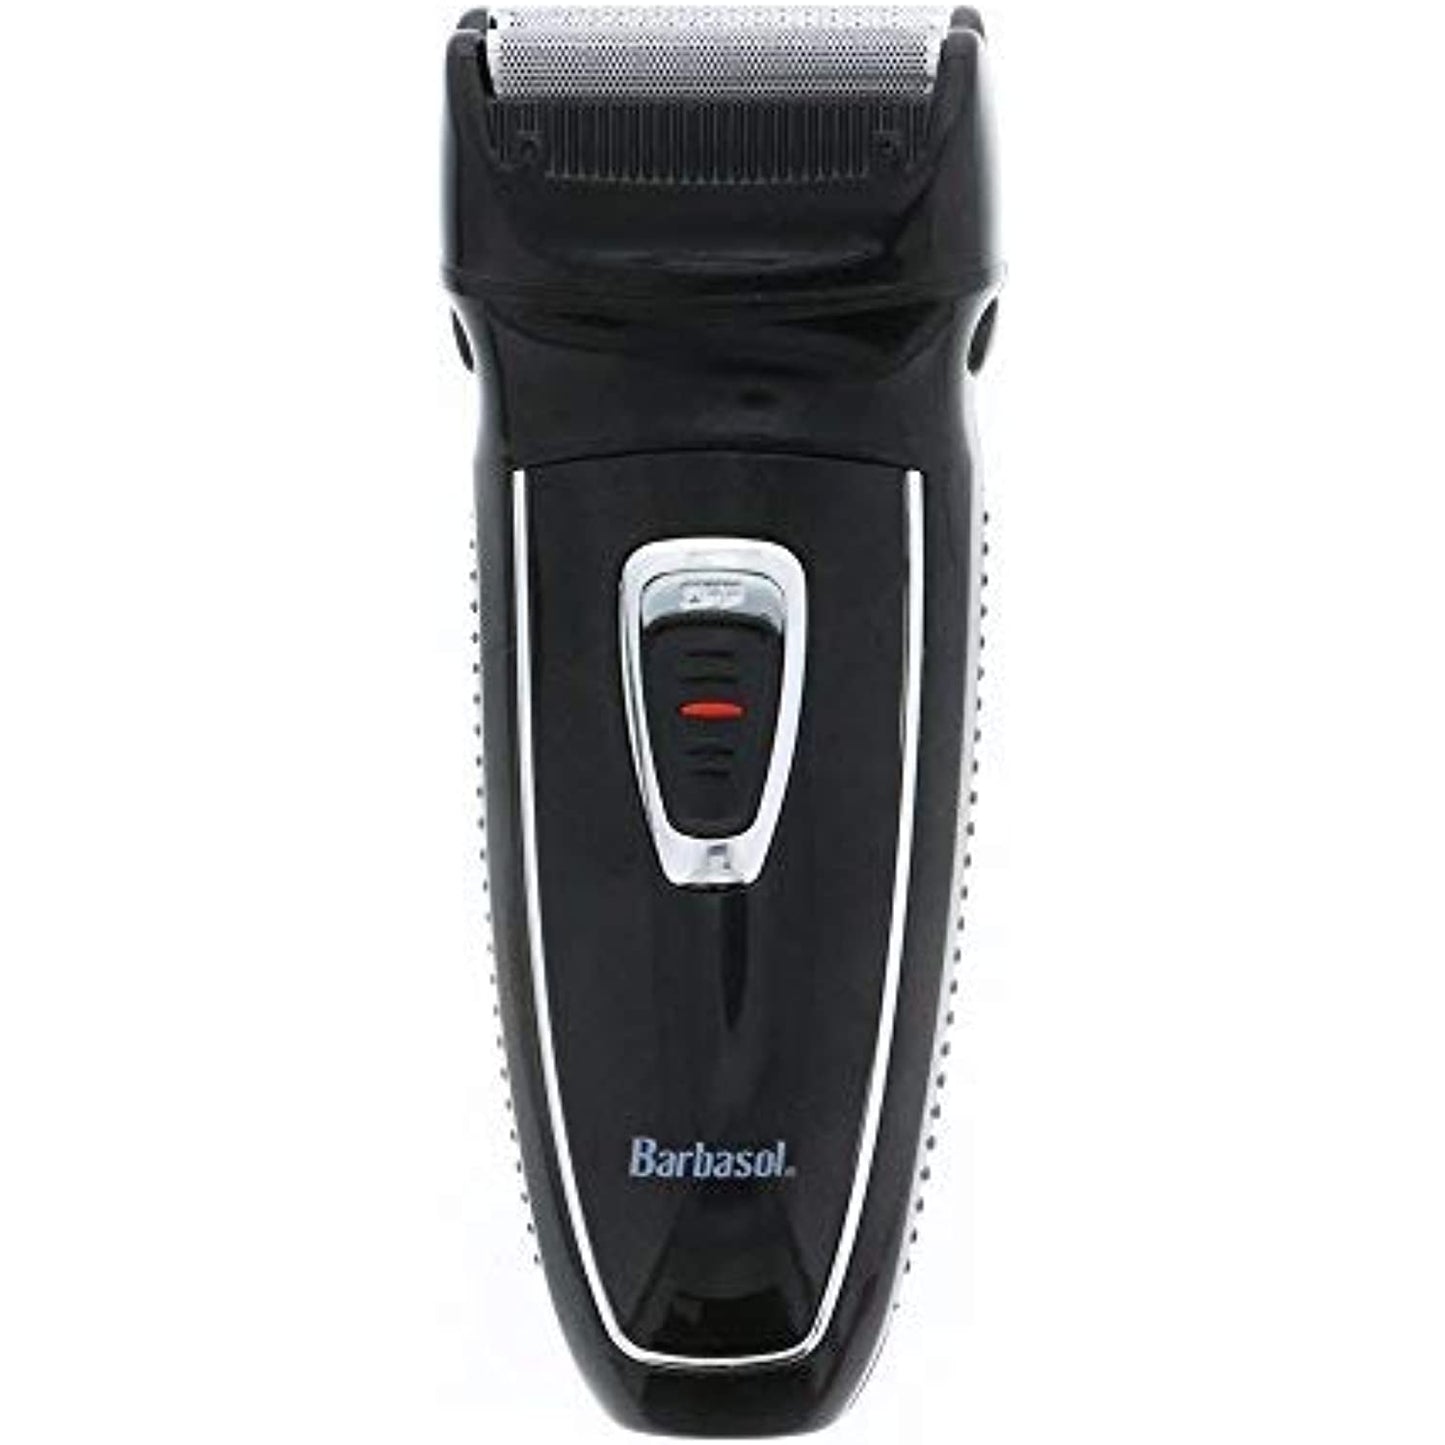 Barbasol Rechargeable Electric Foil Shaver with Stainless Steel Blades and Pop Up Trimmer